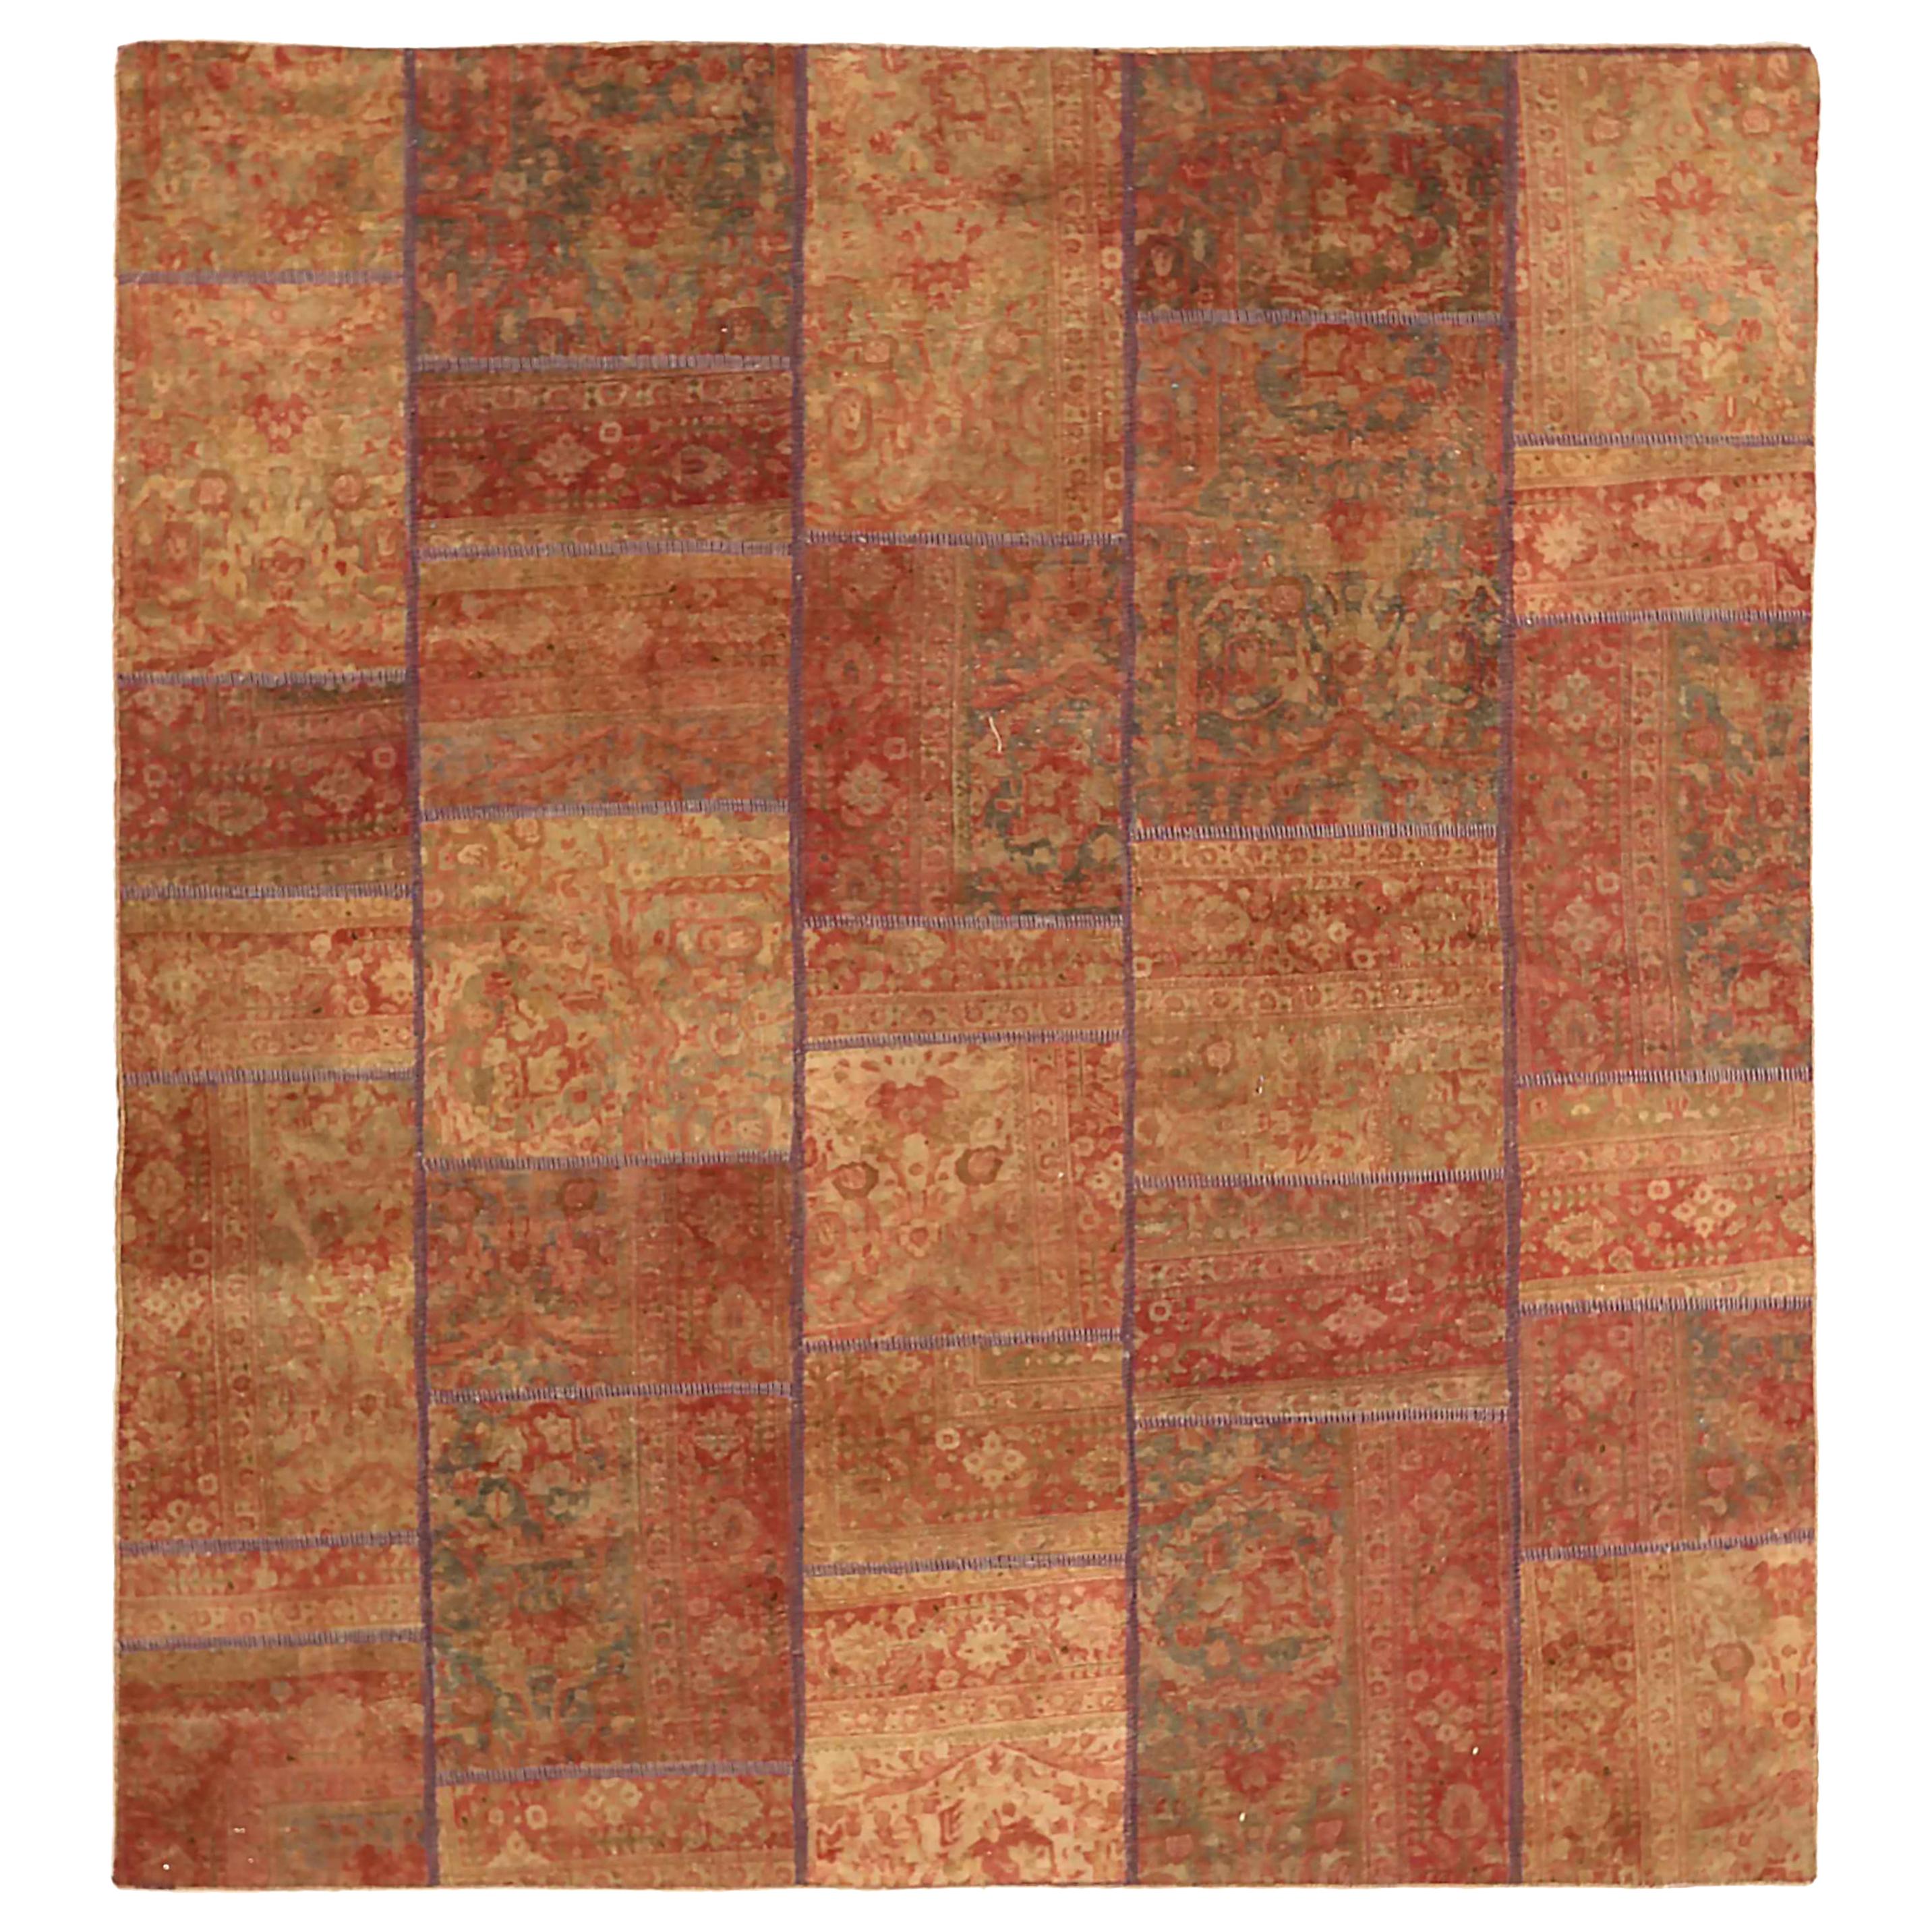 Square Antique Persian Patch Kilim Rug with Floral Details on Red & Orange Field